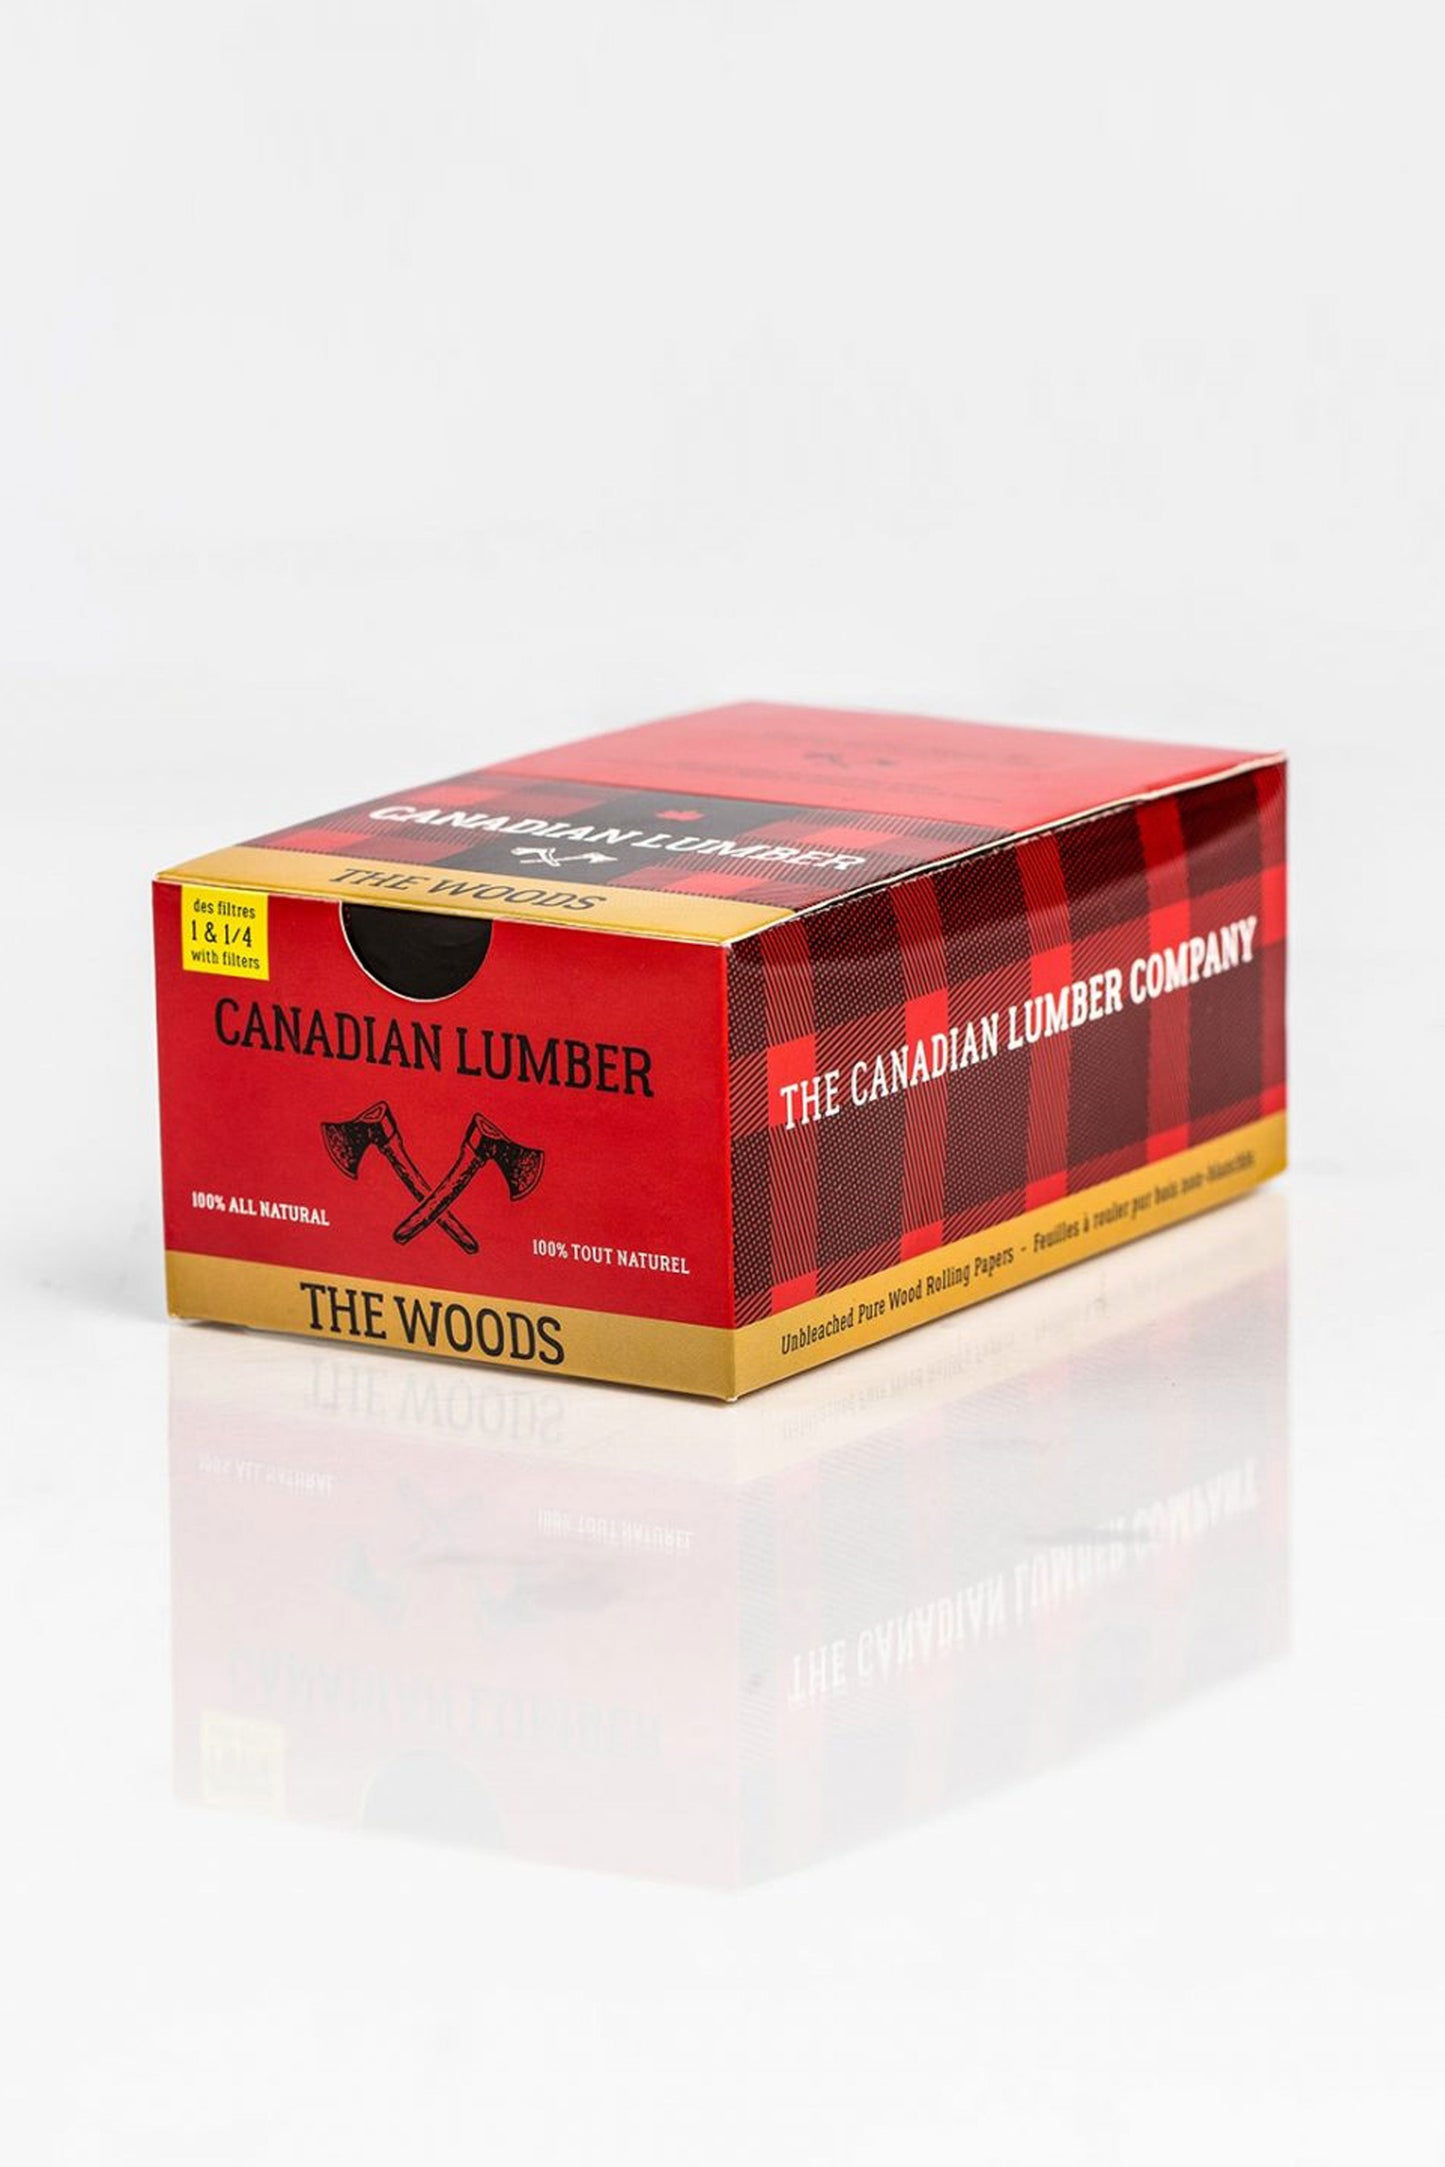 CANADIAN LUMBER THE WOODS 1 1/4 – DISPLAY BOX OF 22_0